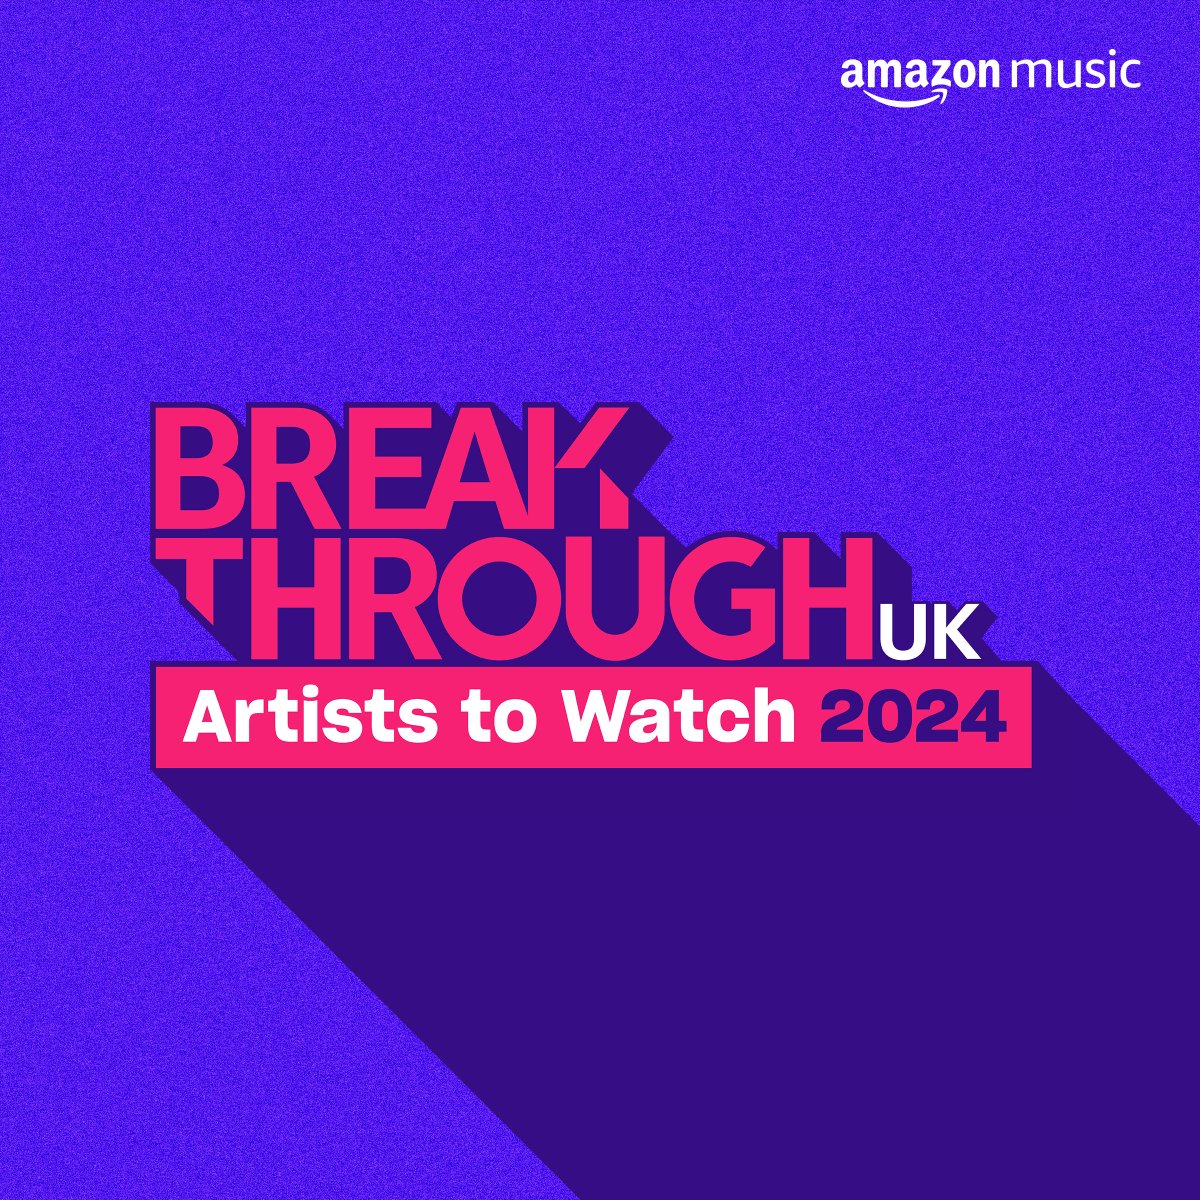 In collaboration with @notionmagazine, we bring you 13 rising stars as part of our Breakthrough UK Artists To Watch 2024! Listen to our playlist now! amzn.to/ATW24